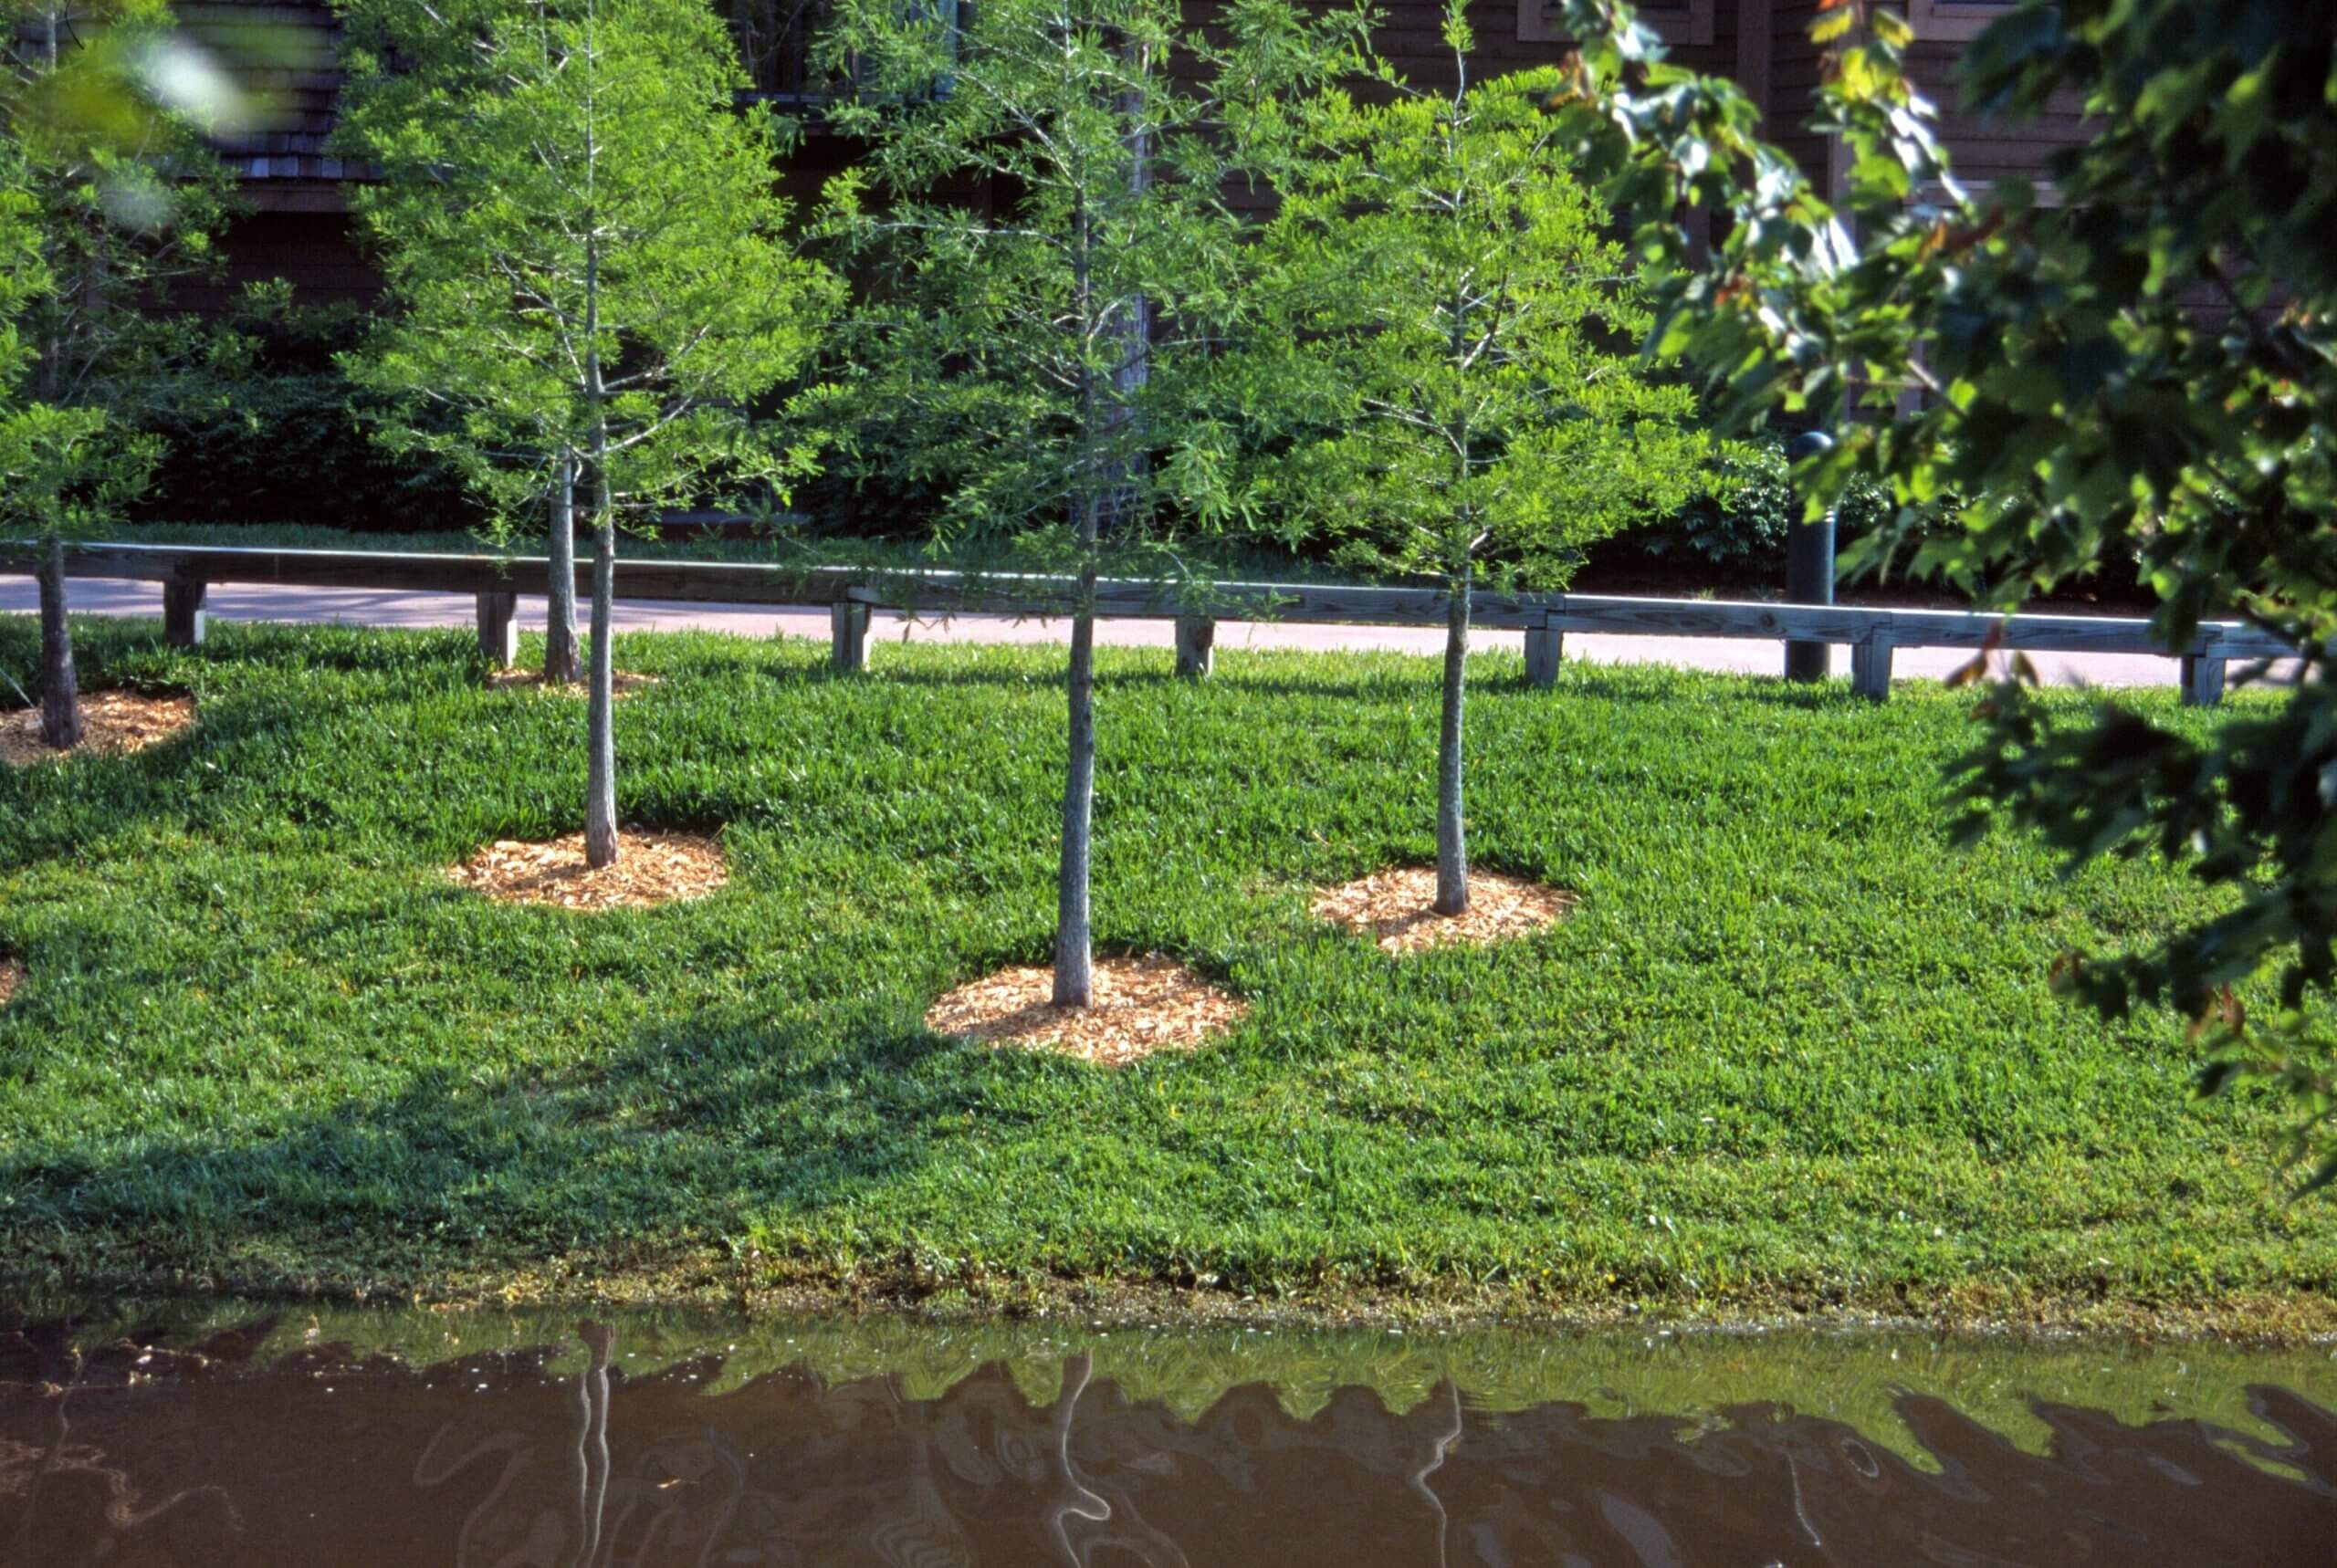 Remove grass in a ring around your young trees in lawns, then apply mulch to create free drainage to the tree roo